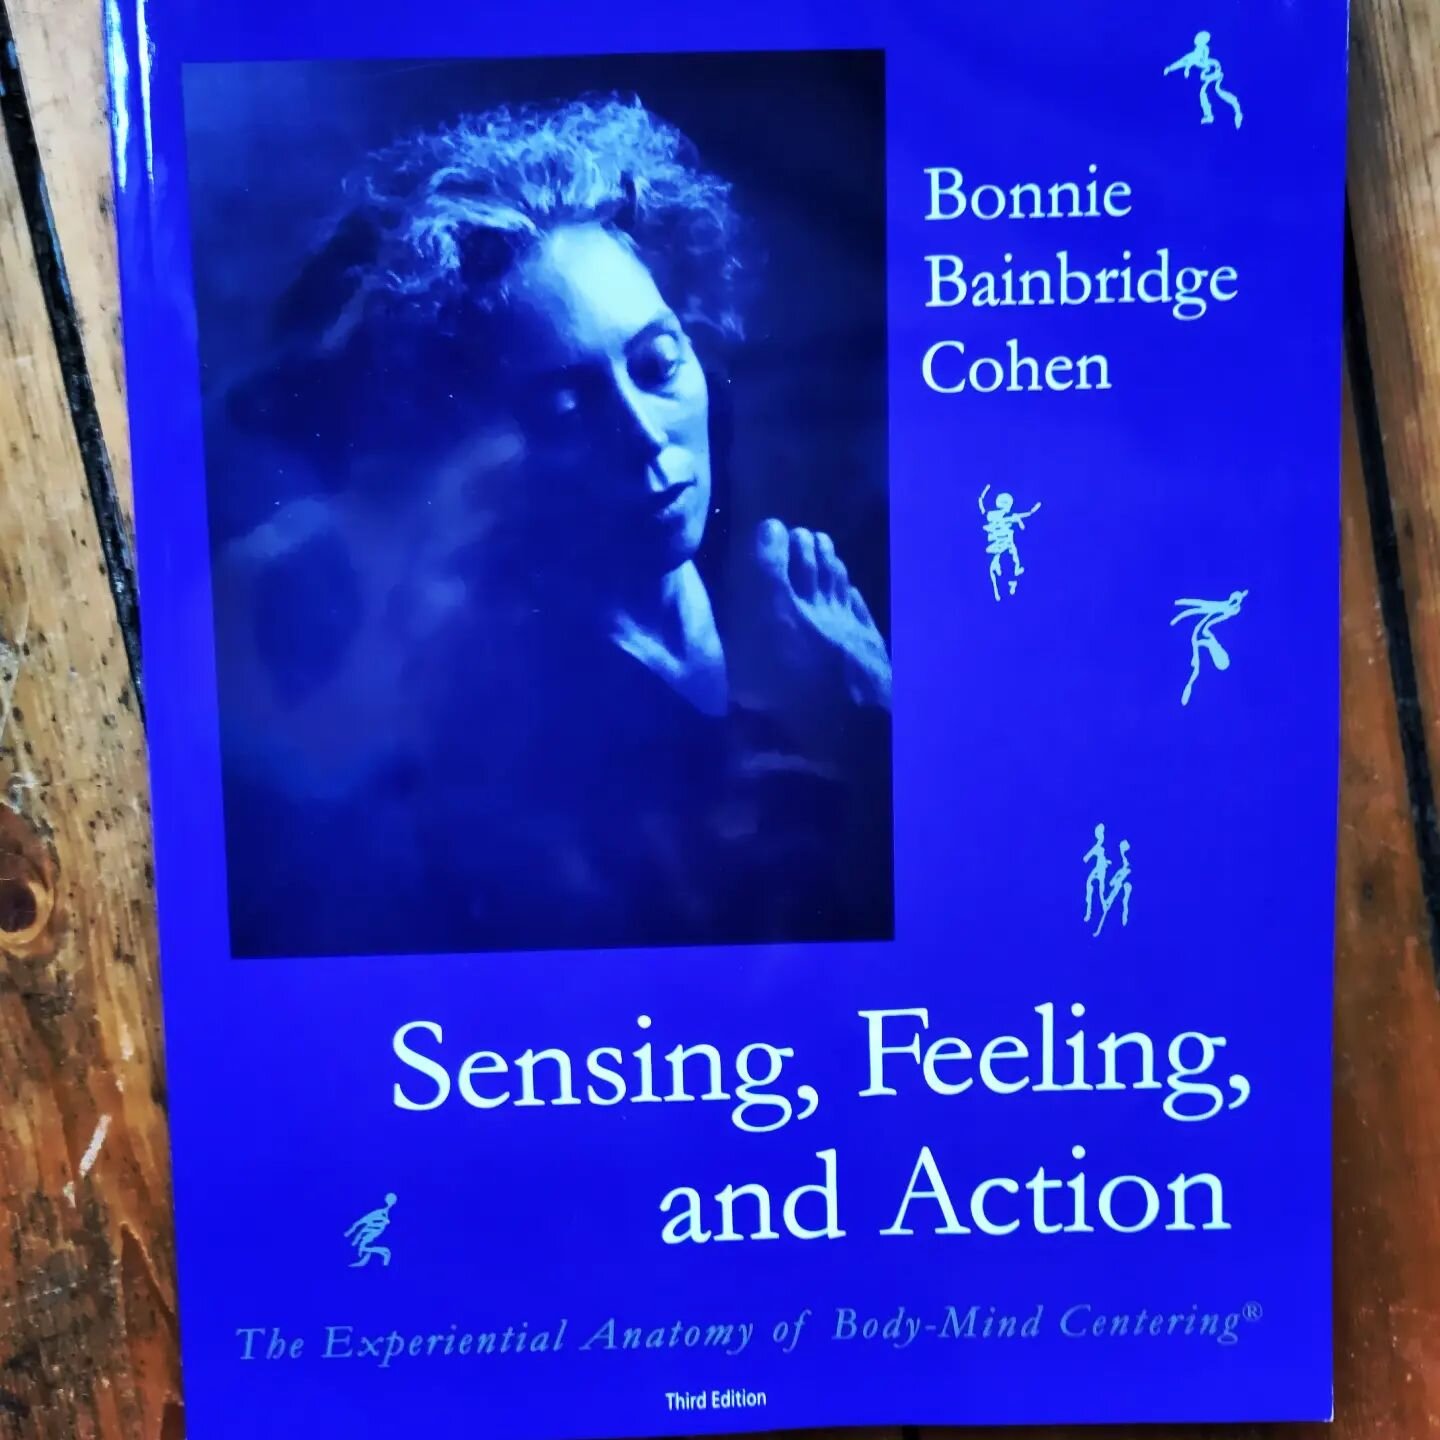 Fabulous book. As recommended by the good folk at mobius dance. Connecting the dots with energy work.
 
#bonniebainbridgecohen 
#bodymindcentering
#healing 
#somatics